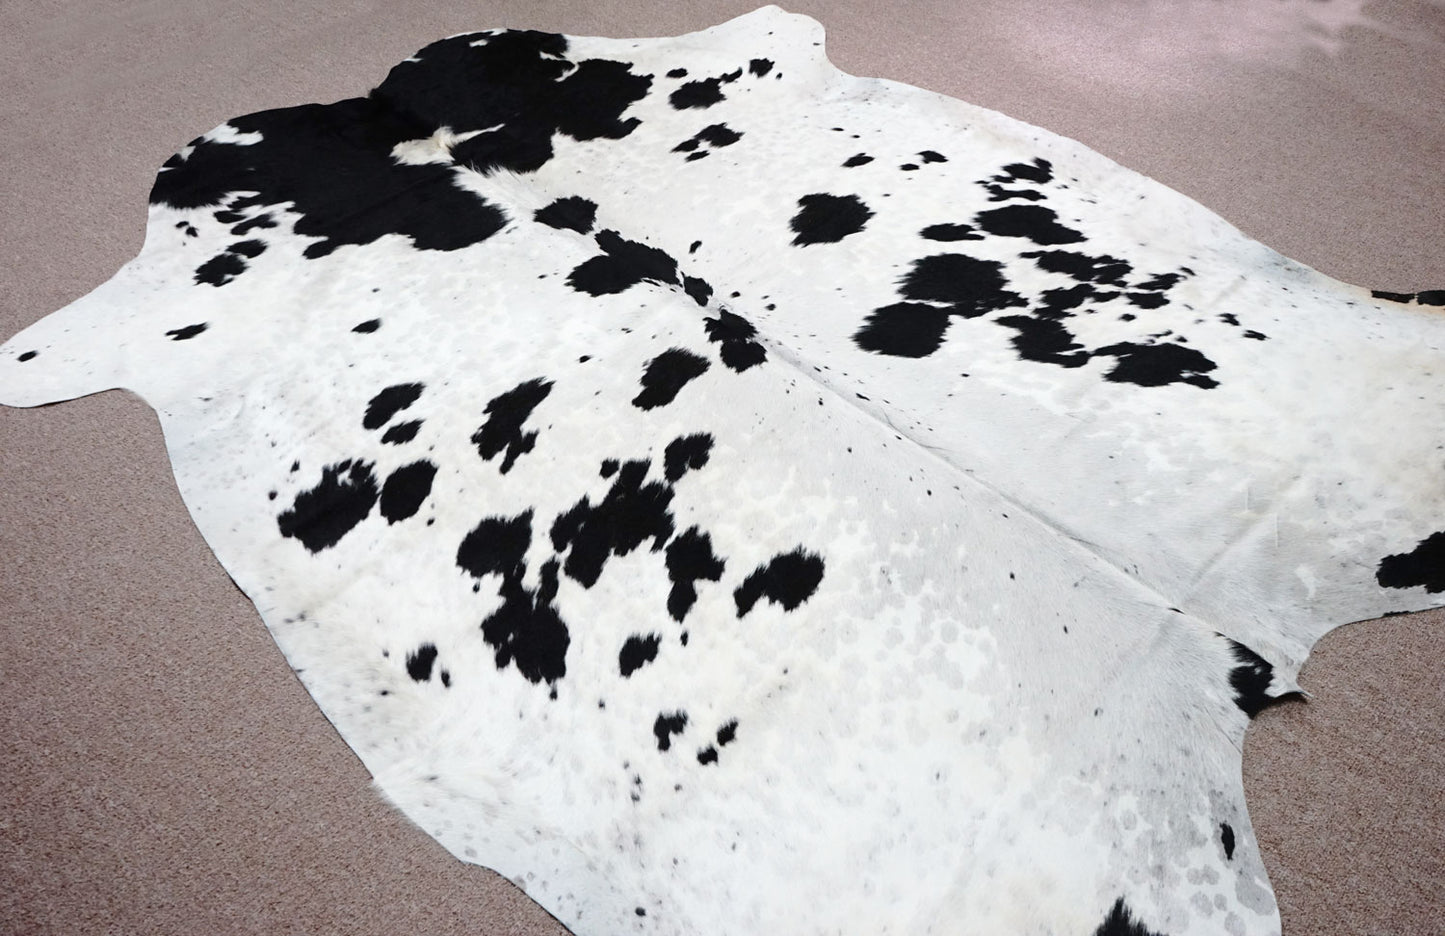 Extra Large spotted cowhide rug 6.6 x7.6 ft -4104 - Rodeo Cowhide Rugs